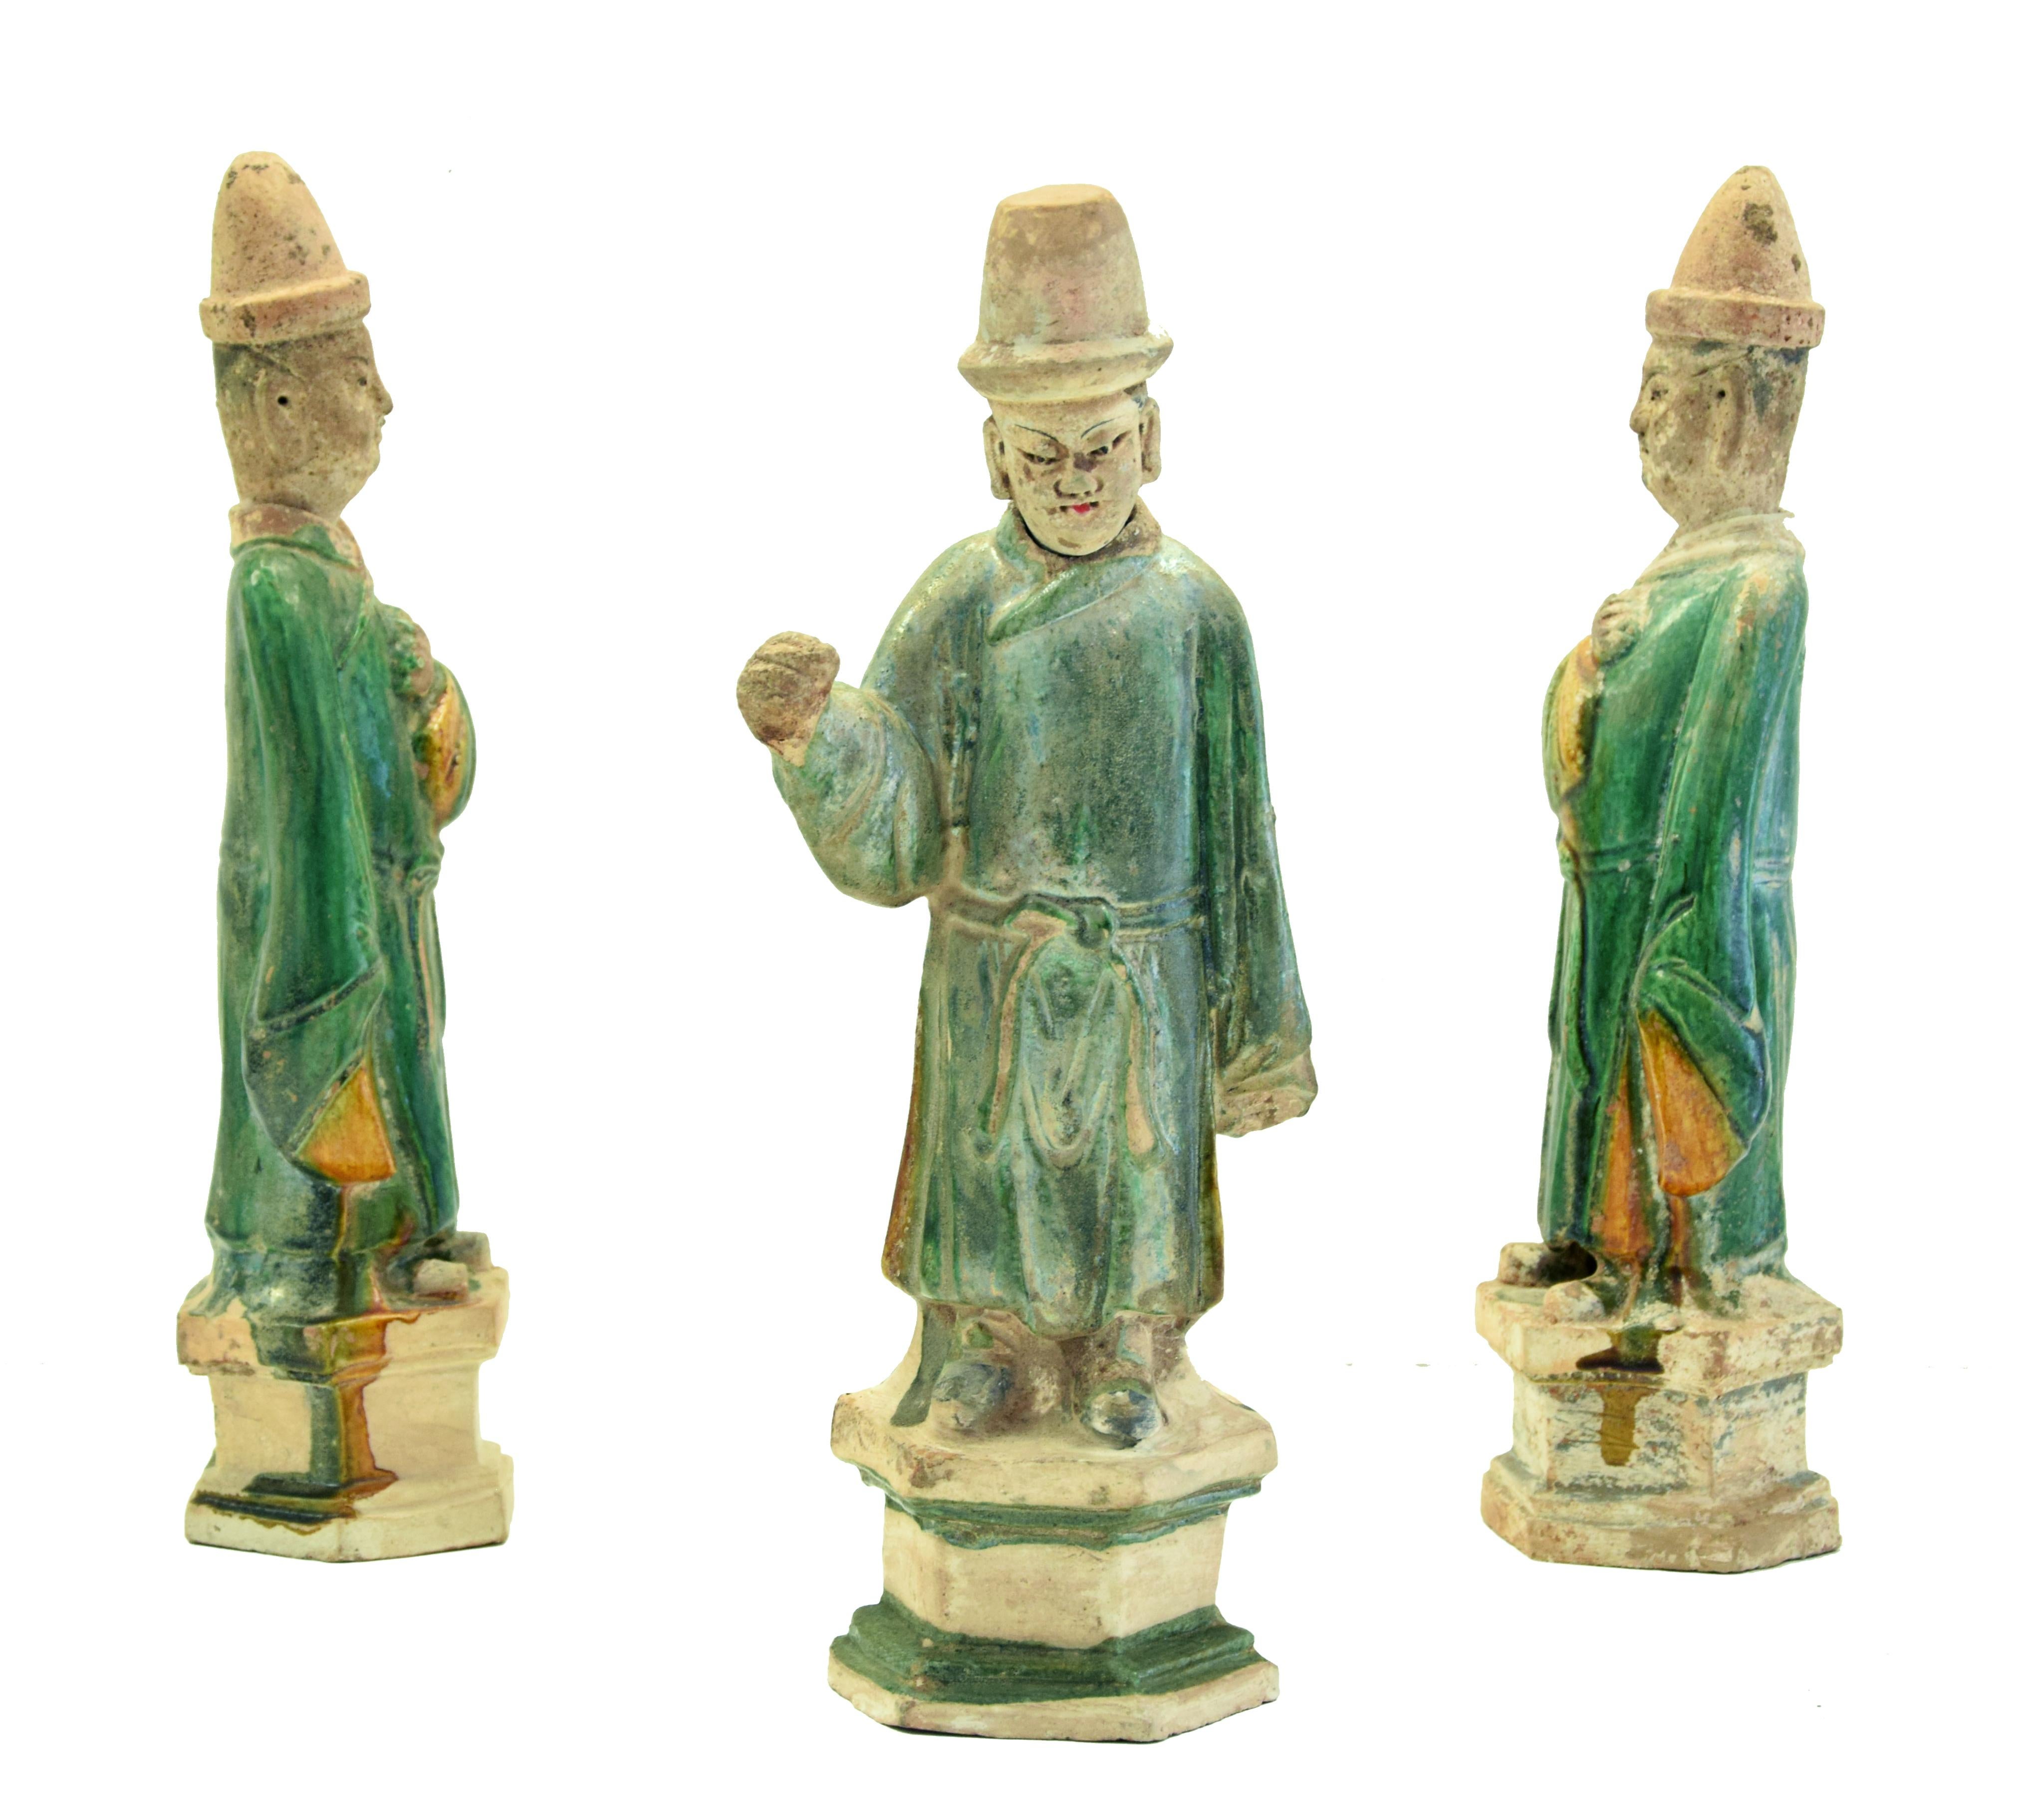 This Chinese terracotta group of figures is made up of three figures of Chinese dignitaries in glazed green and ocher terracotta on hexagonal bases and removable heads.

From the dresses with wide sleeves and workmanship, as well as from the